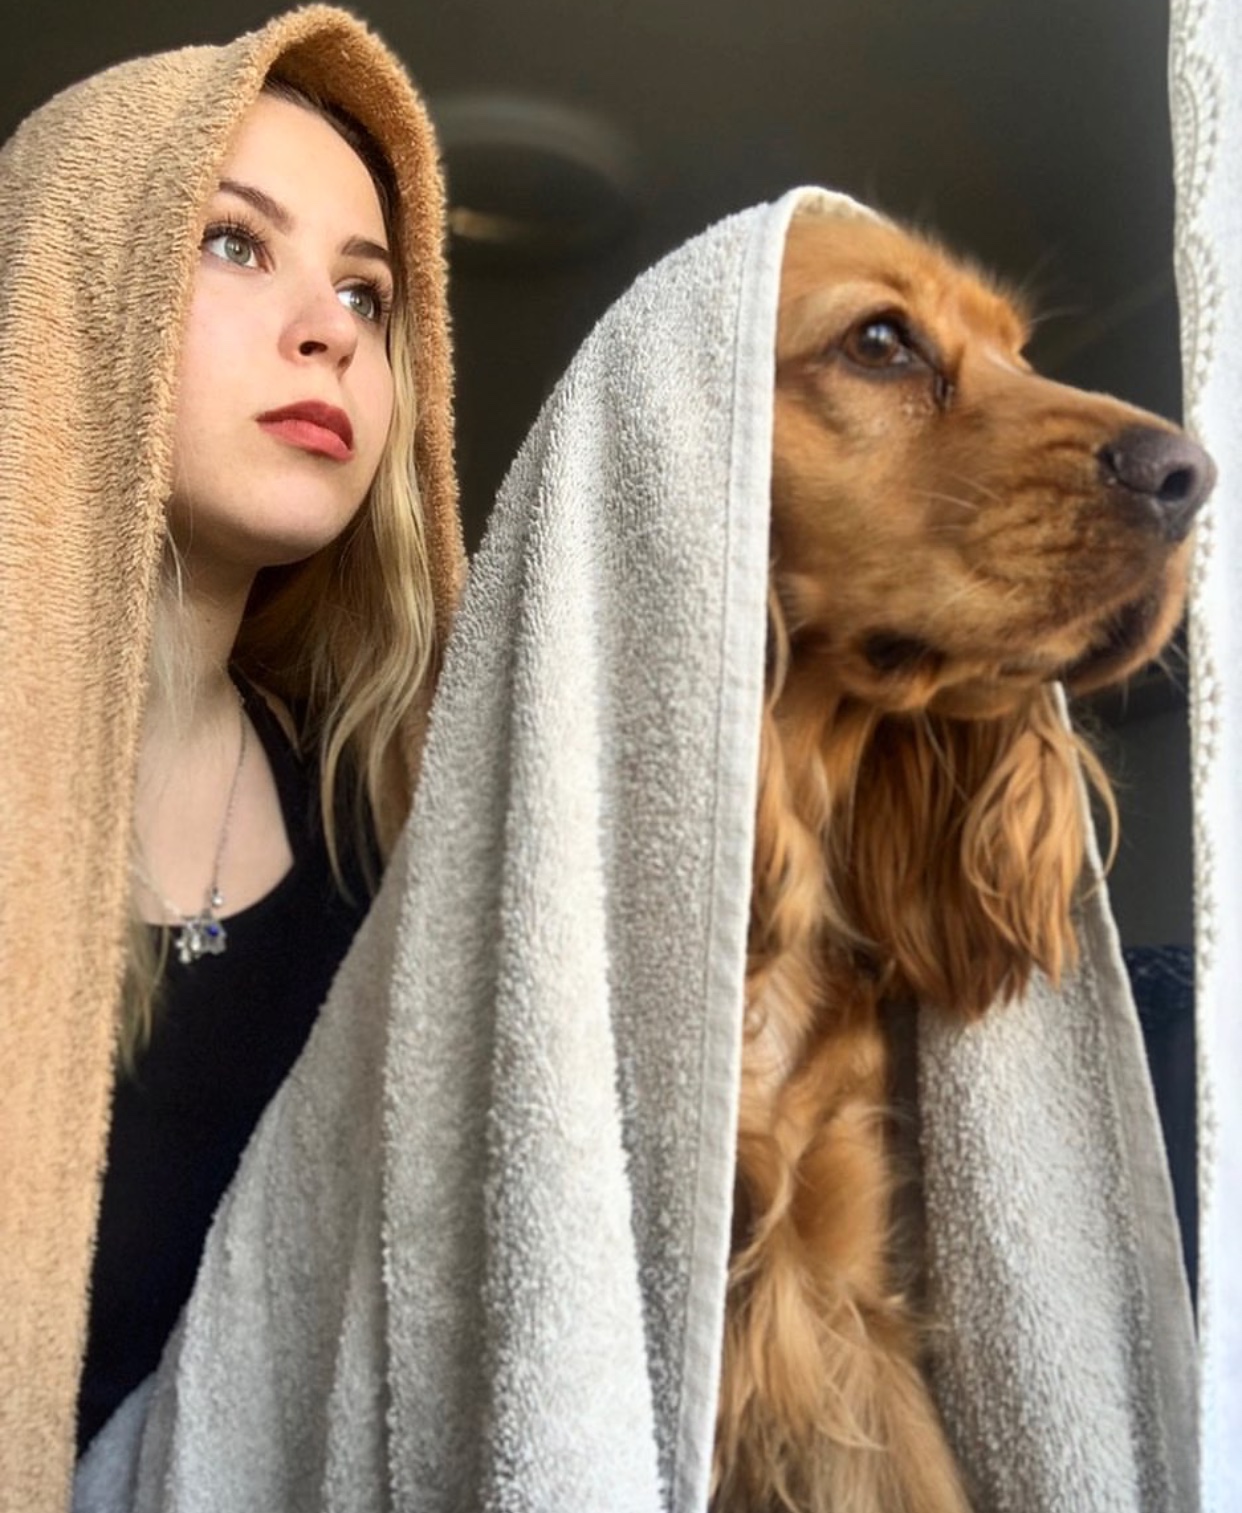 A English Cocker Spaniel with a towel over its head and a woman behind him with a brown blanket over her head